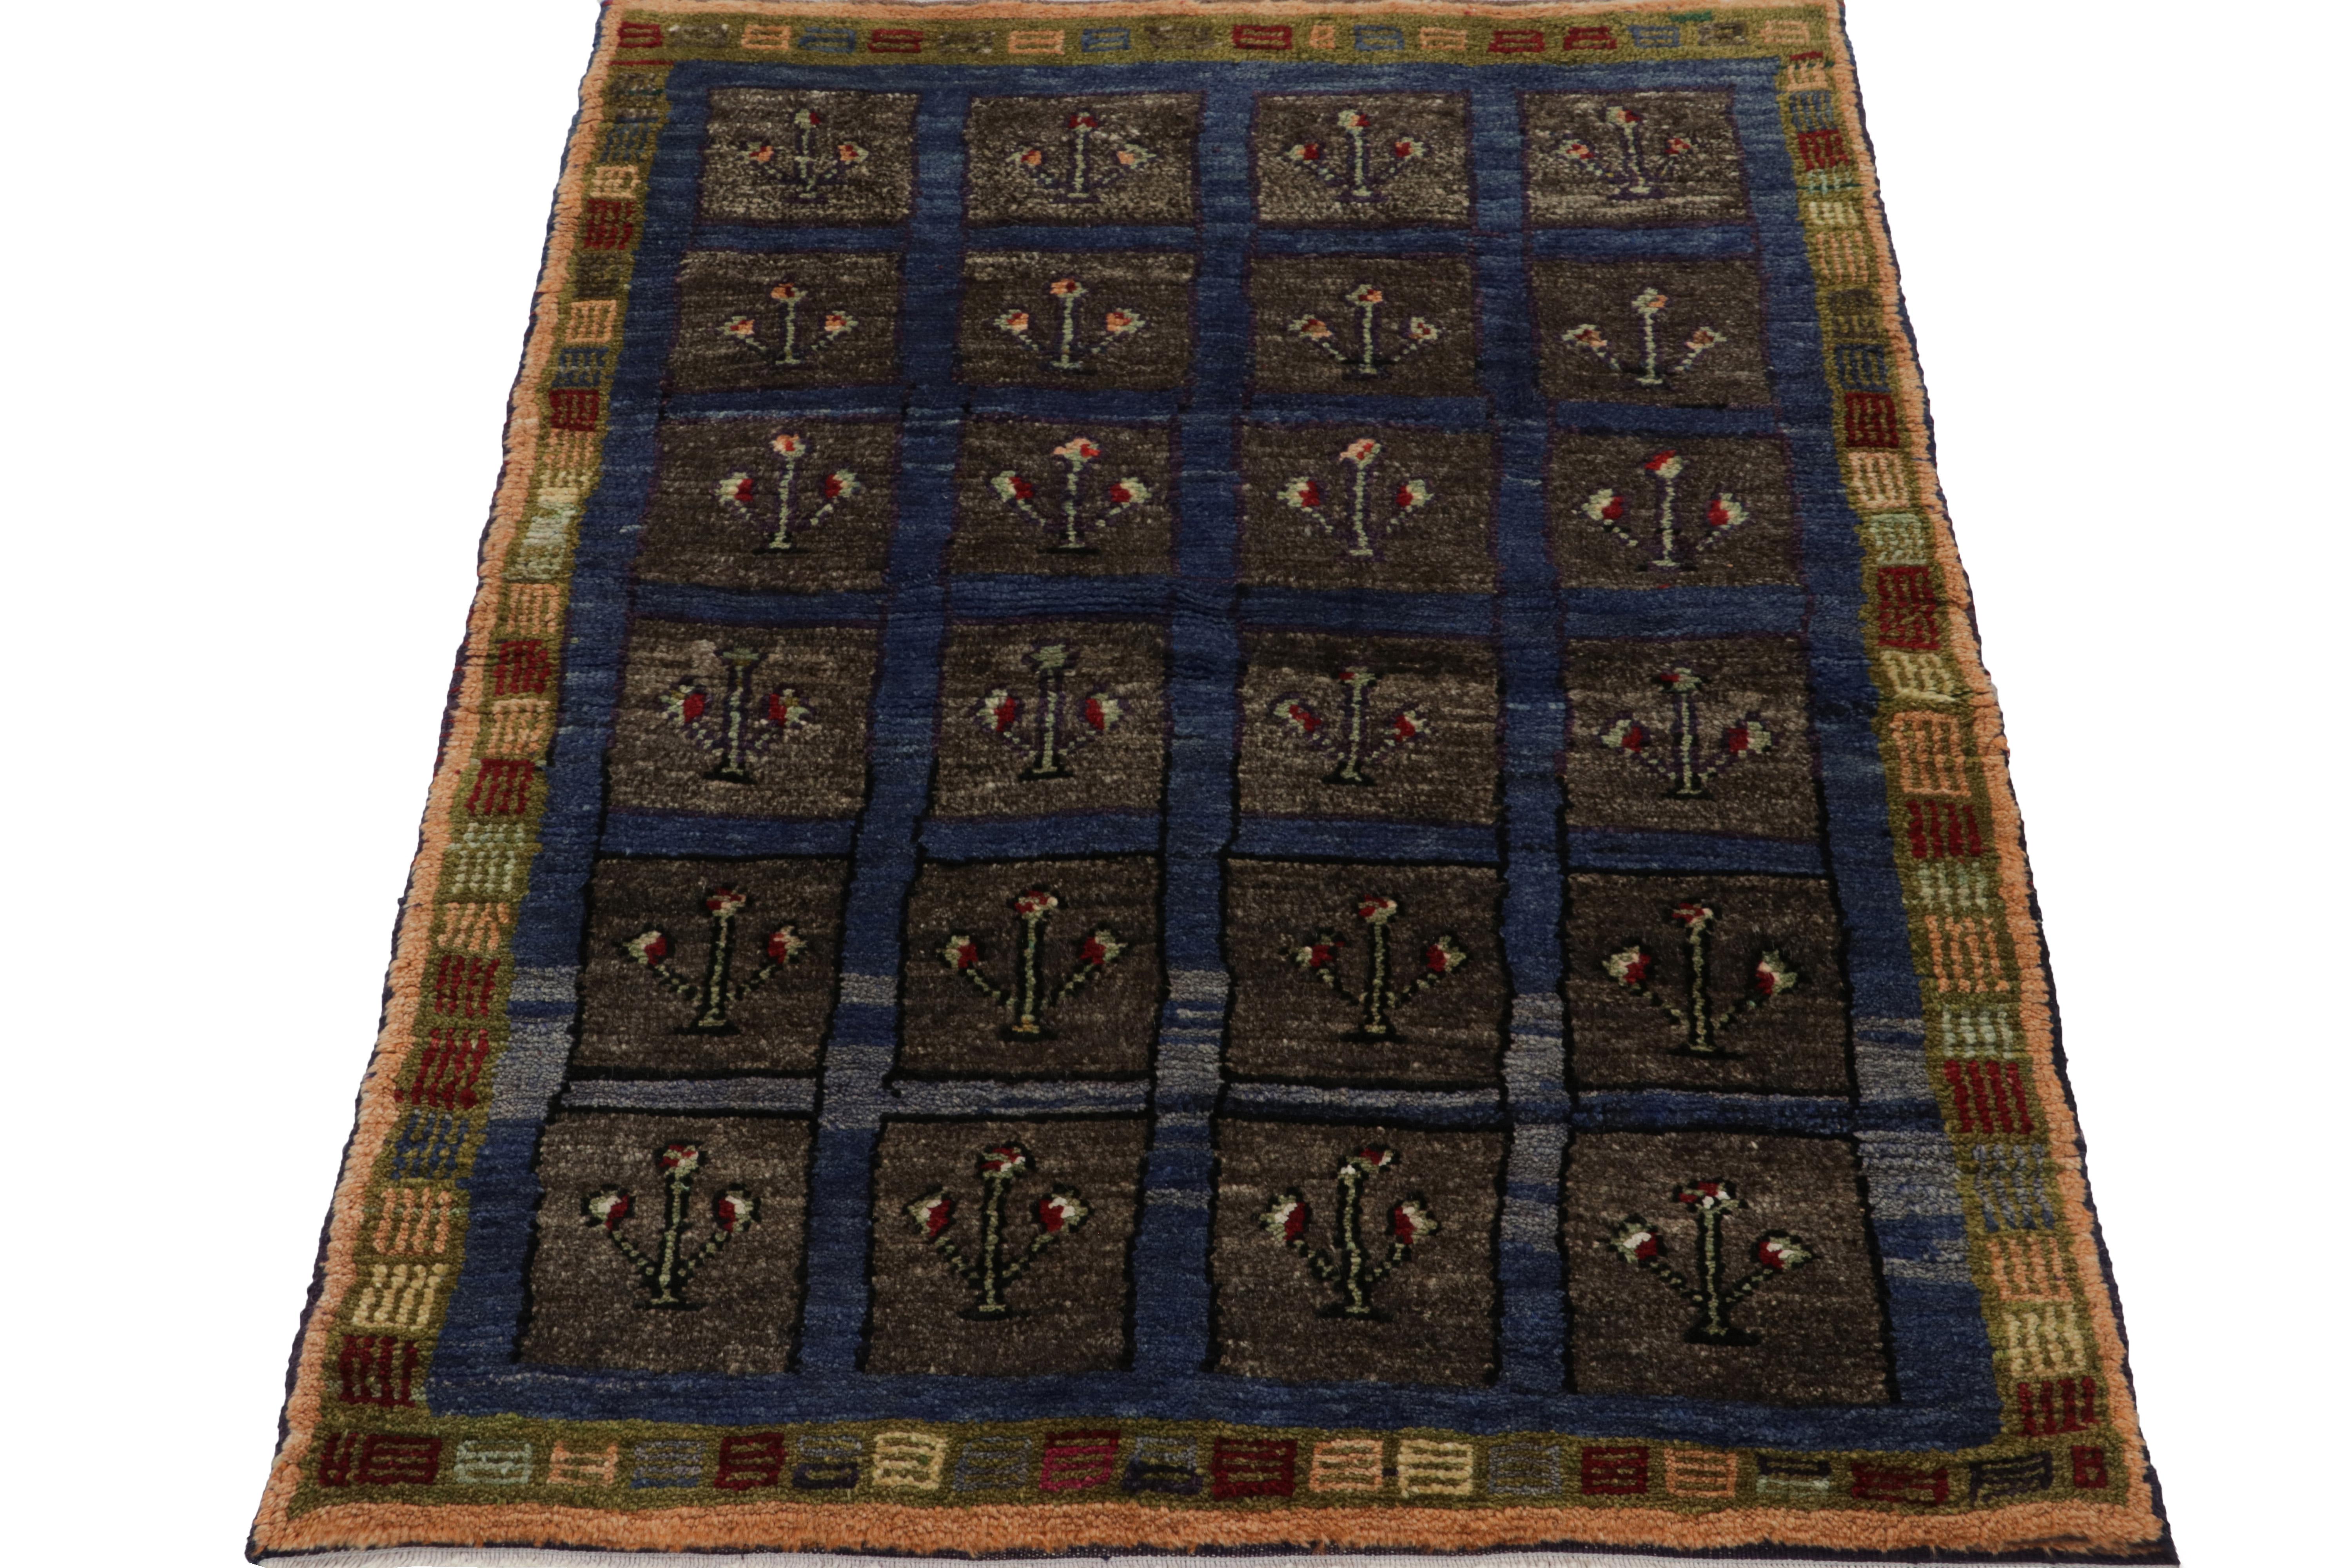 Coming from Turkey circa 1950-1960, a 3x4 vintage Tulu rug featuring tribal geometric patterns in deep blue & dark grey - seemingly forming compartments to envelope flower buds. Handwoven in wool, the vision relishes a softer color variation on the